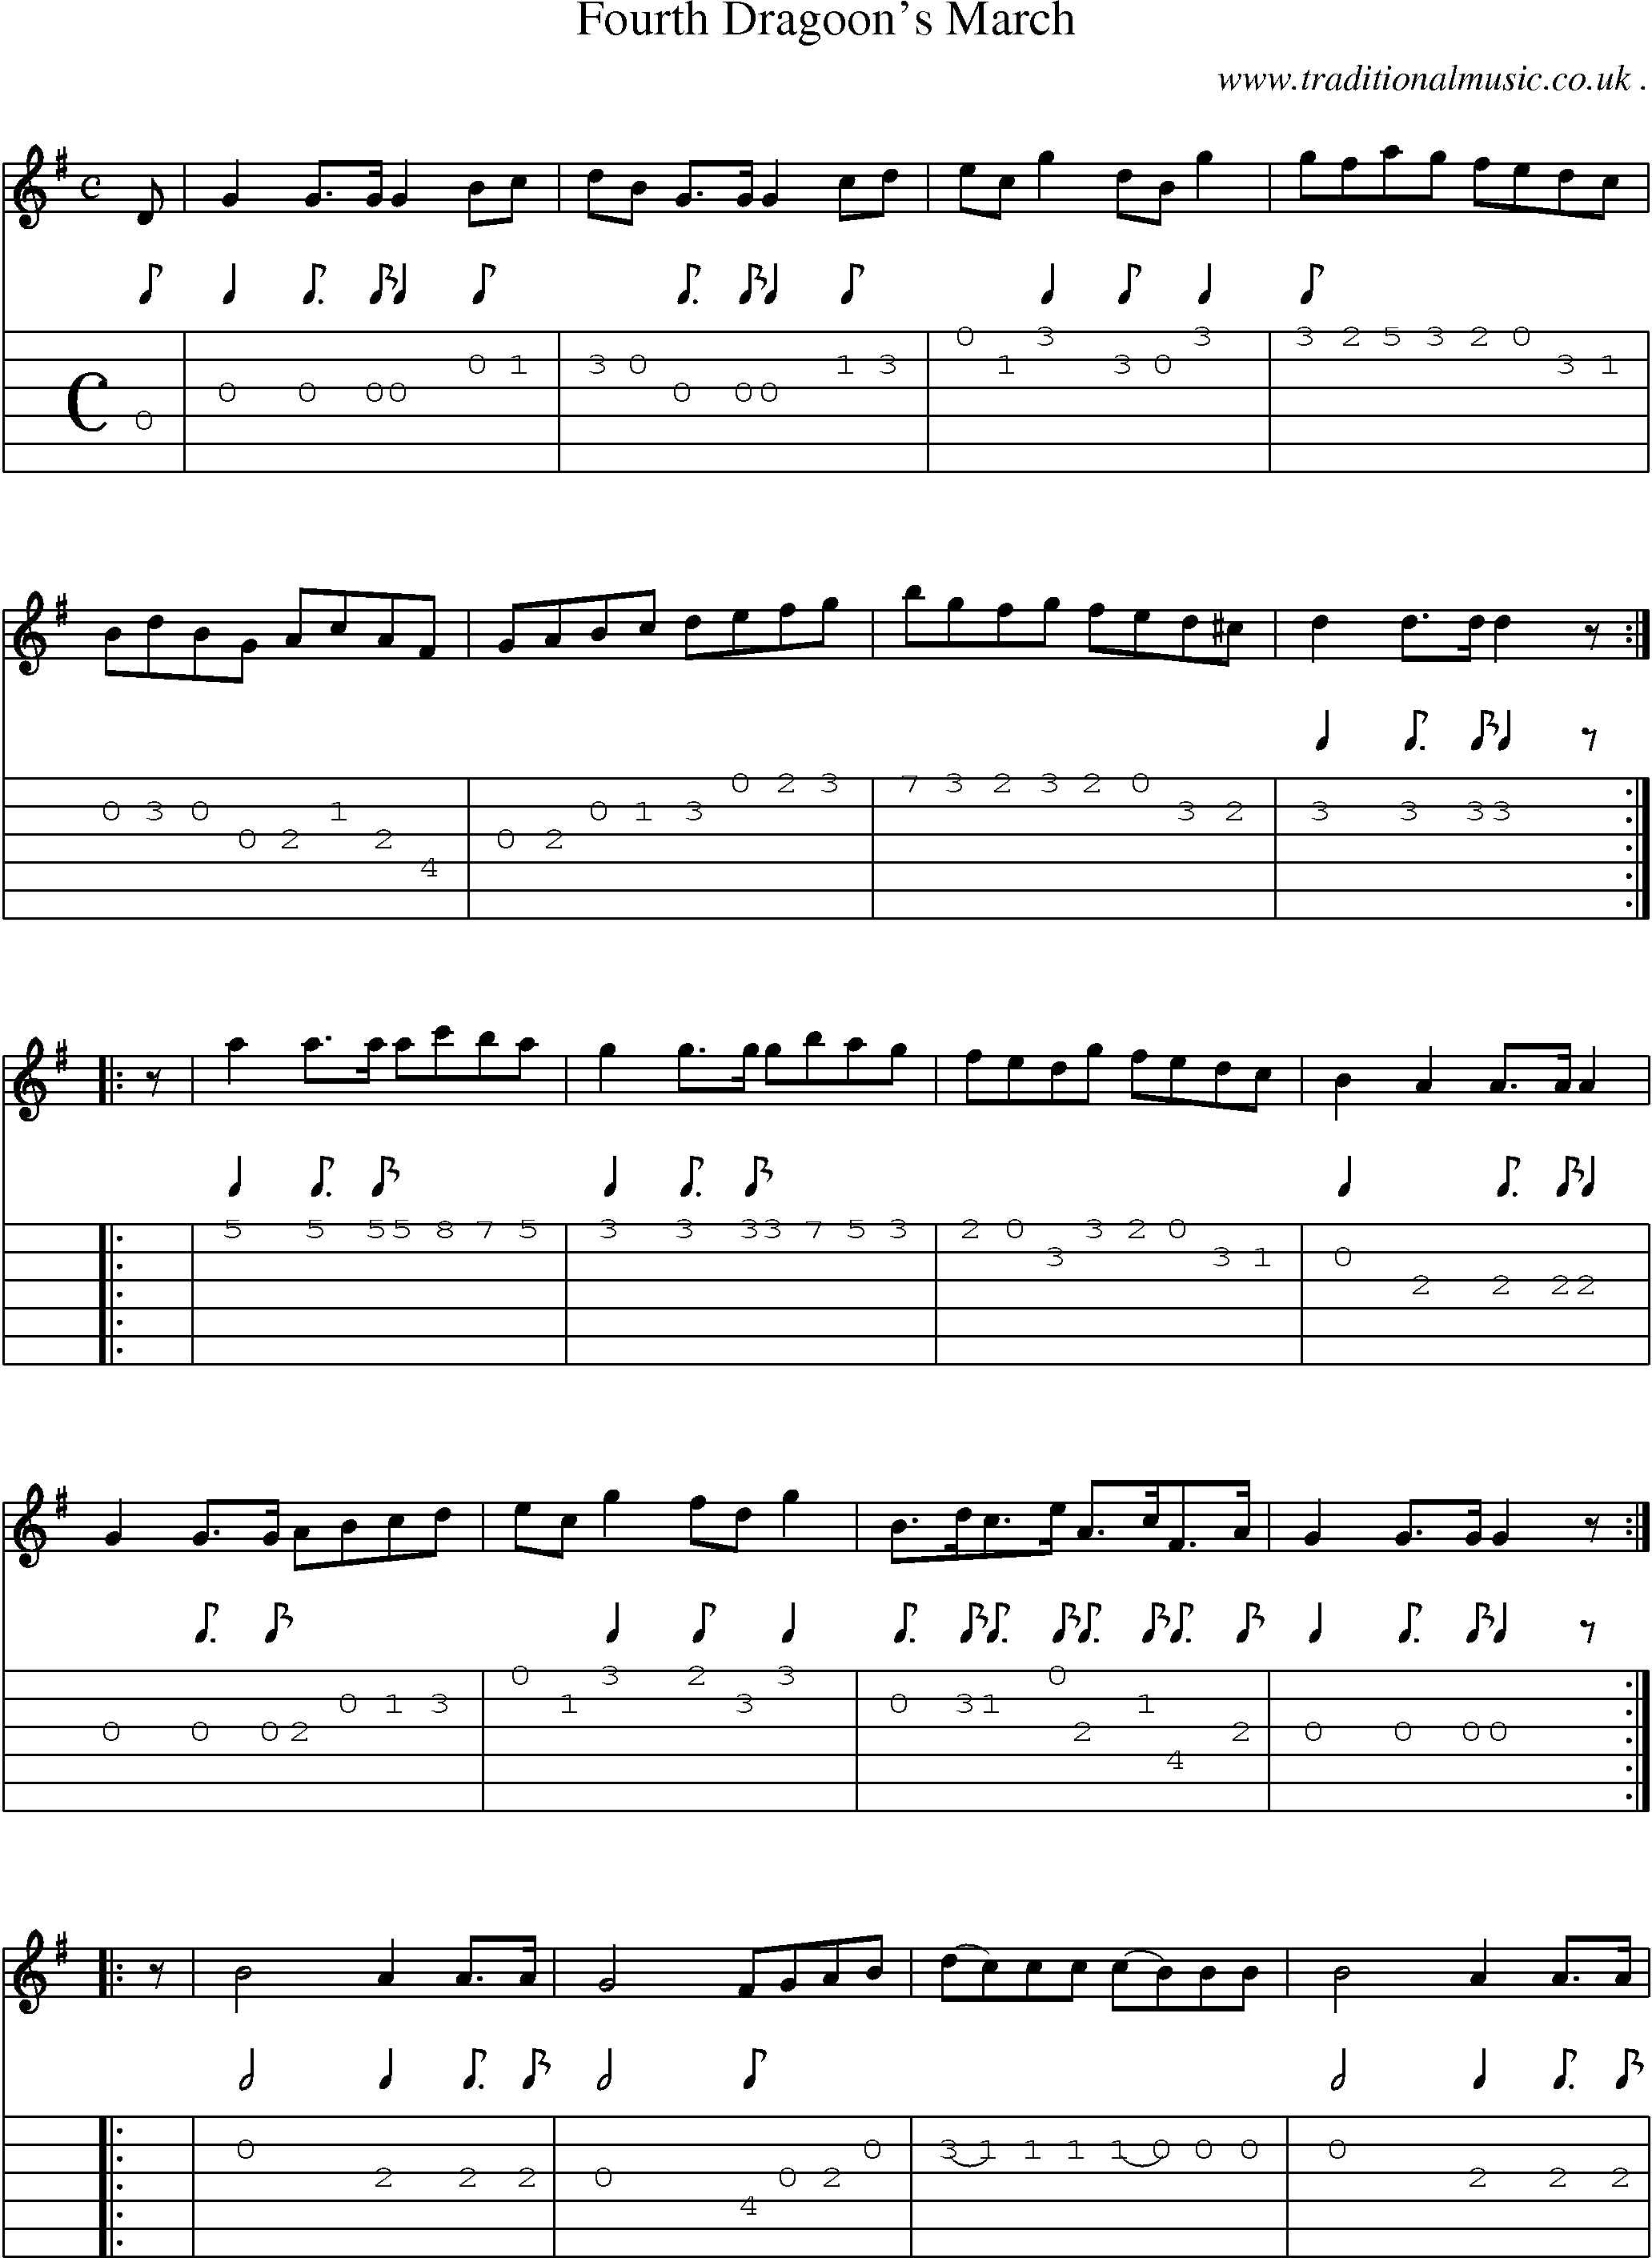 Sheet-Music and Guitar Tabs for Fourth Dragoons March